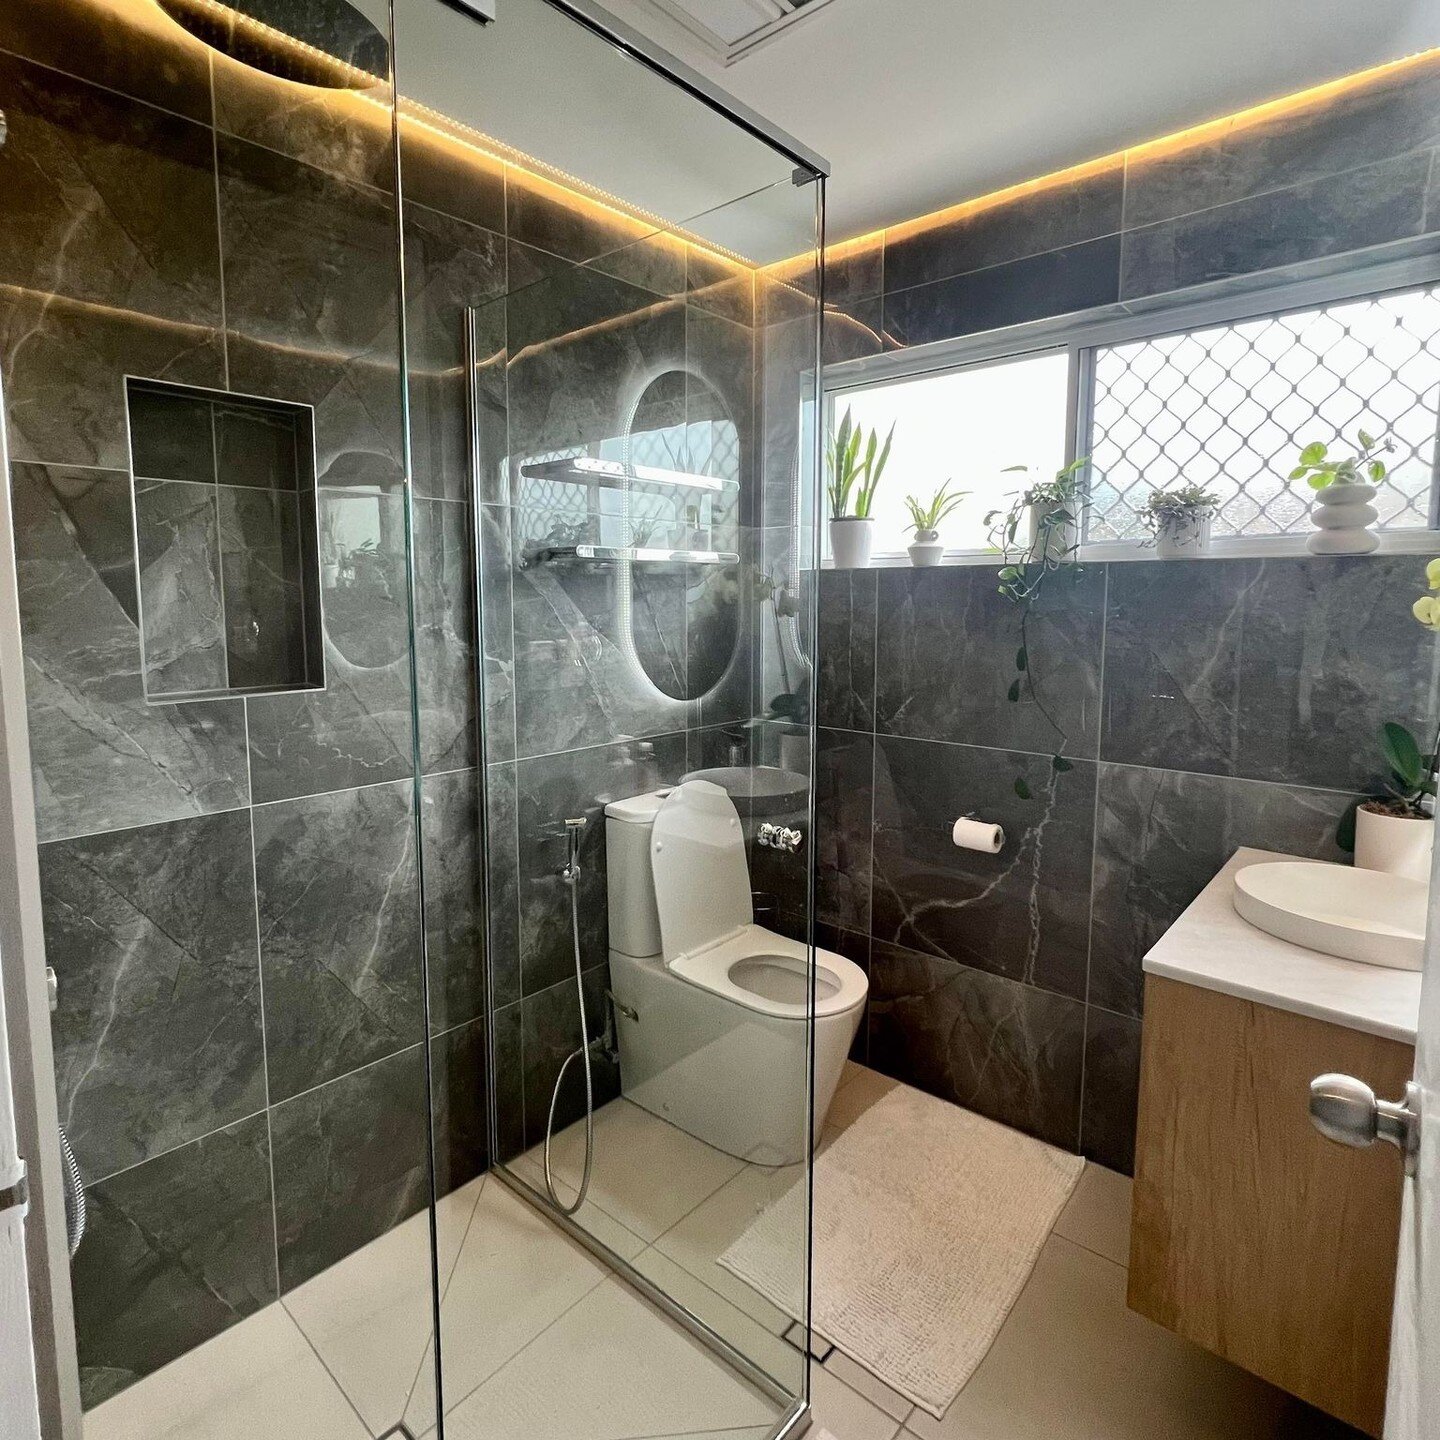 From outdated to outstanding! Check out this amazing before and after transformation by Gold Star Bathrooms. Our team worked their magic to create a stunning and functional space that our clients love. Swipe left to see the incredible results! 

#Gol